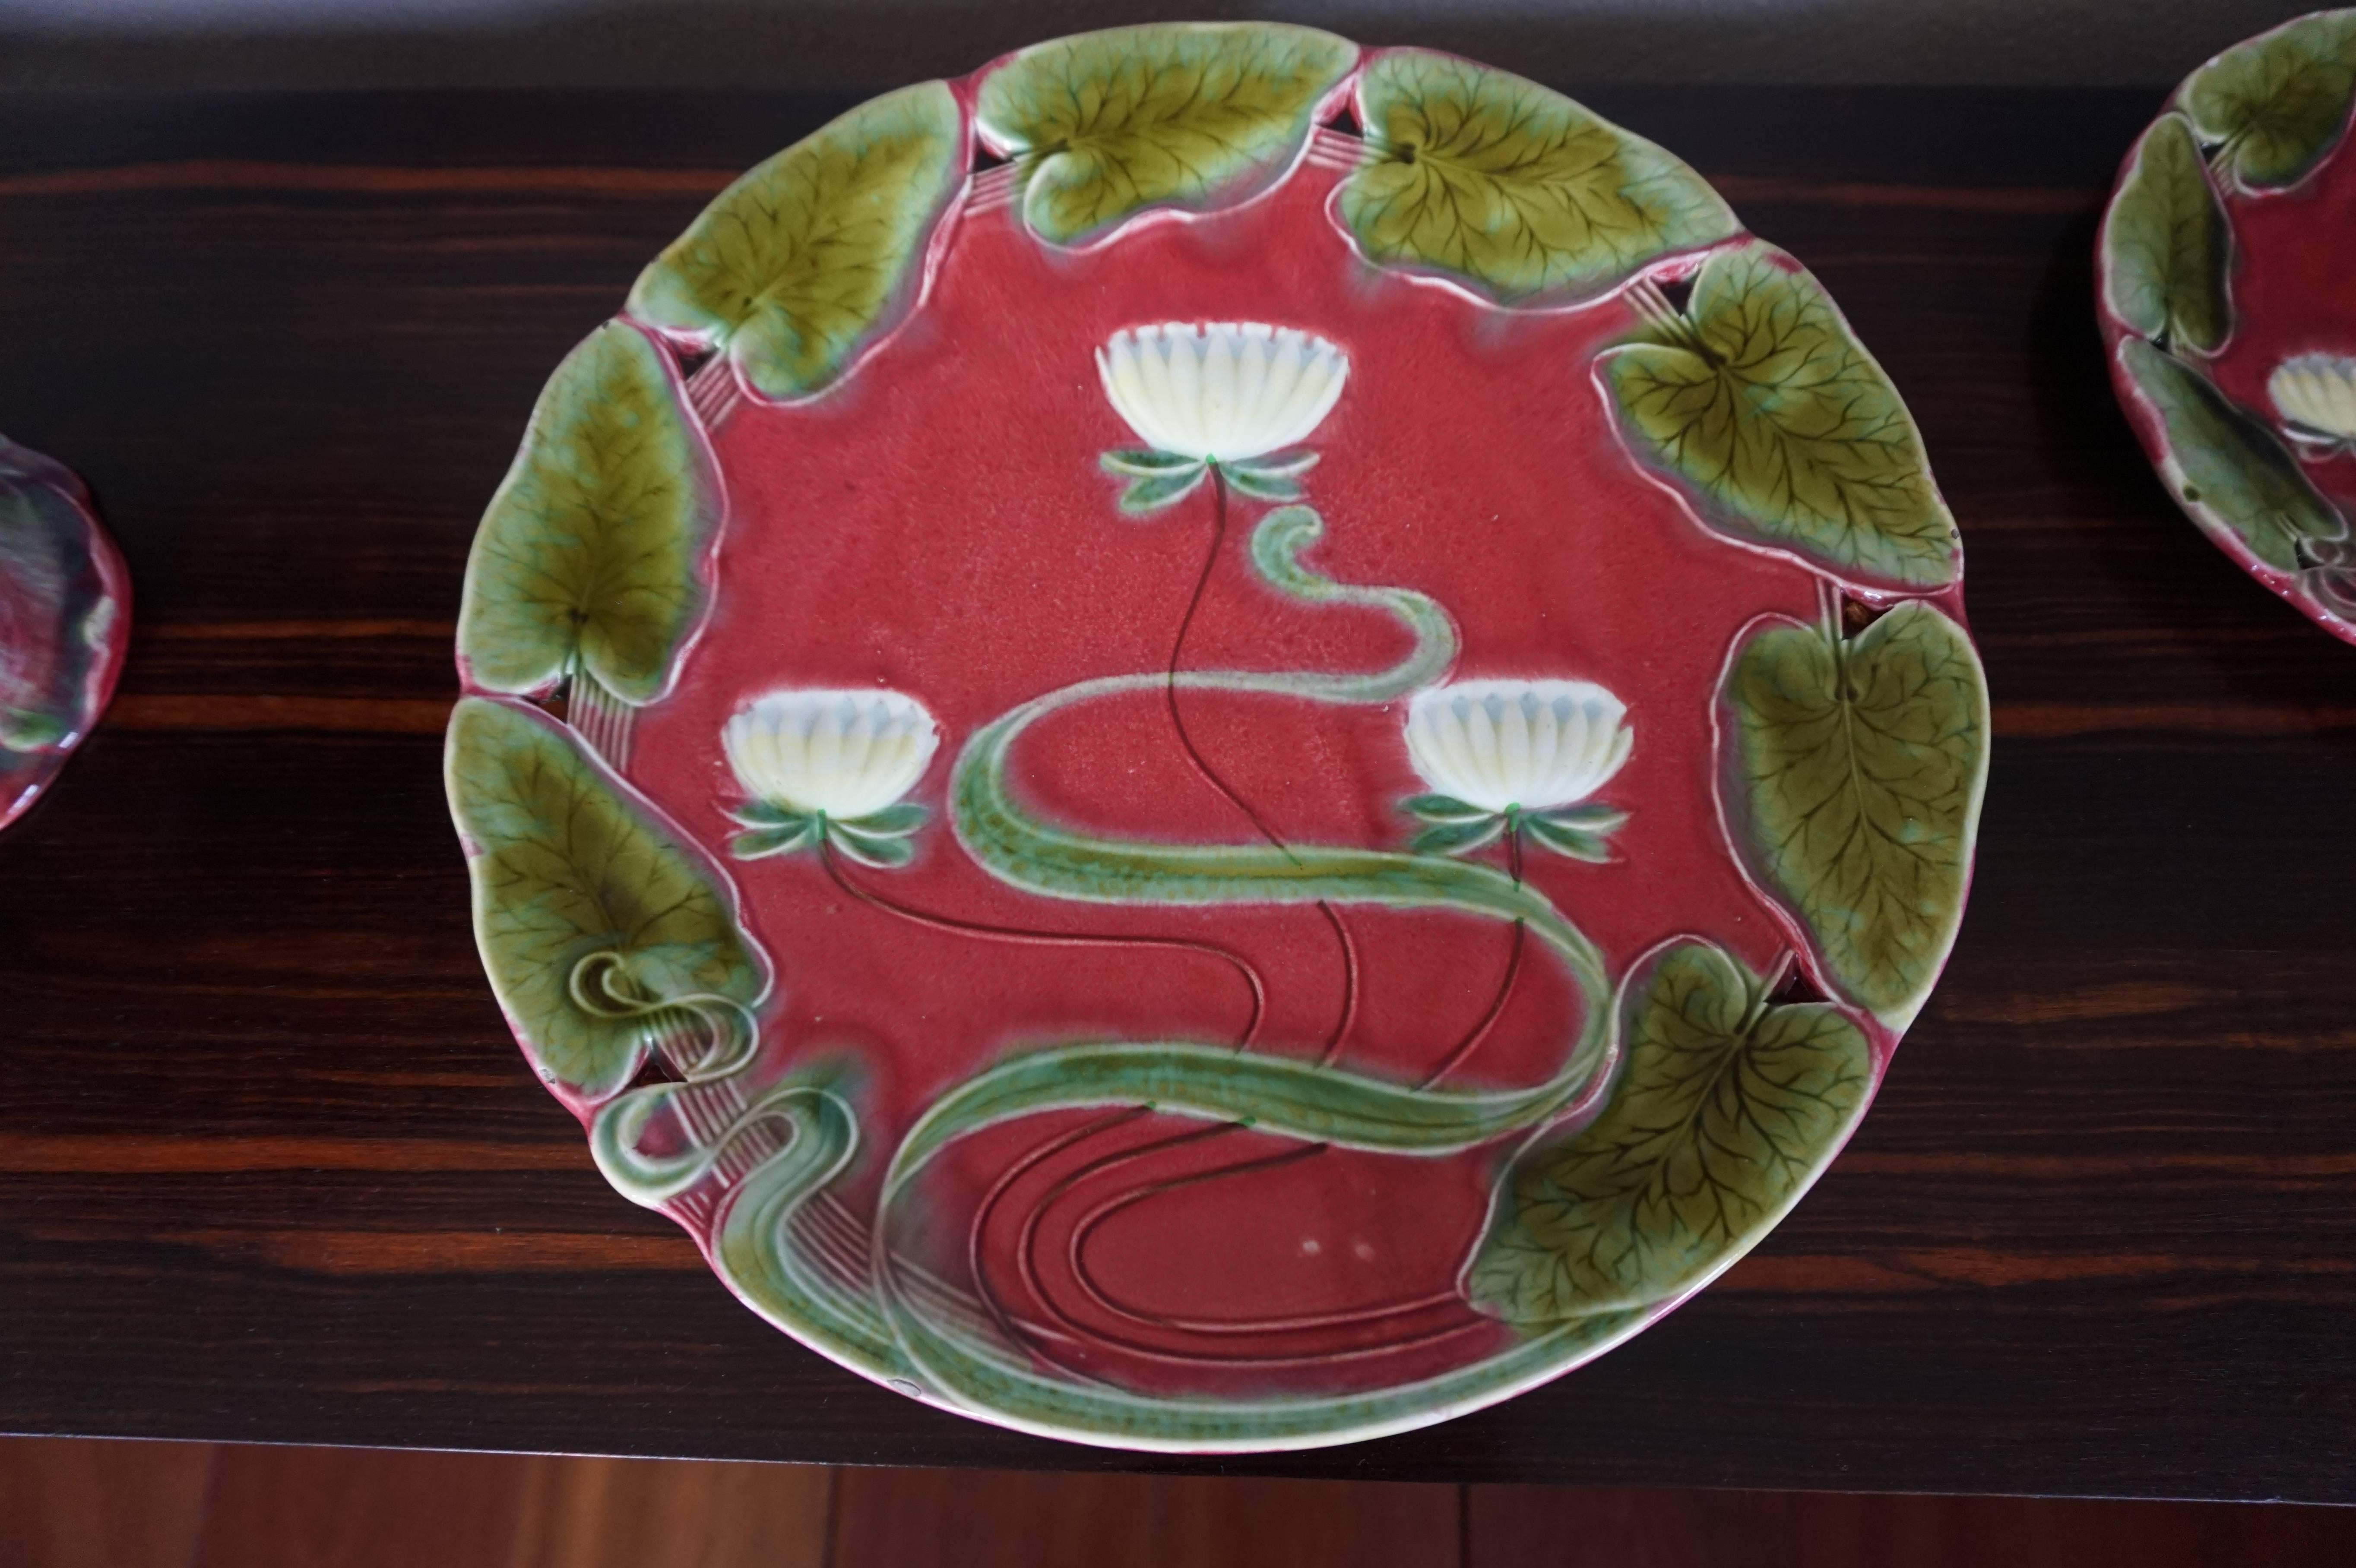 20th Century Art Nouveau Majolica Glazed Tableware Set with Lotus Flower Pattern in Relief